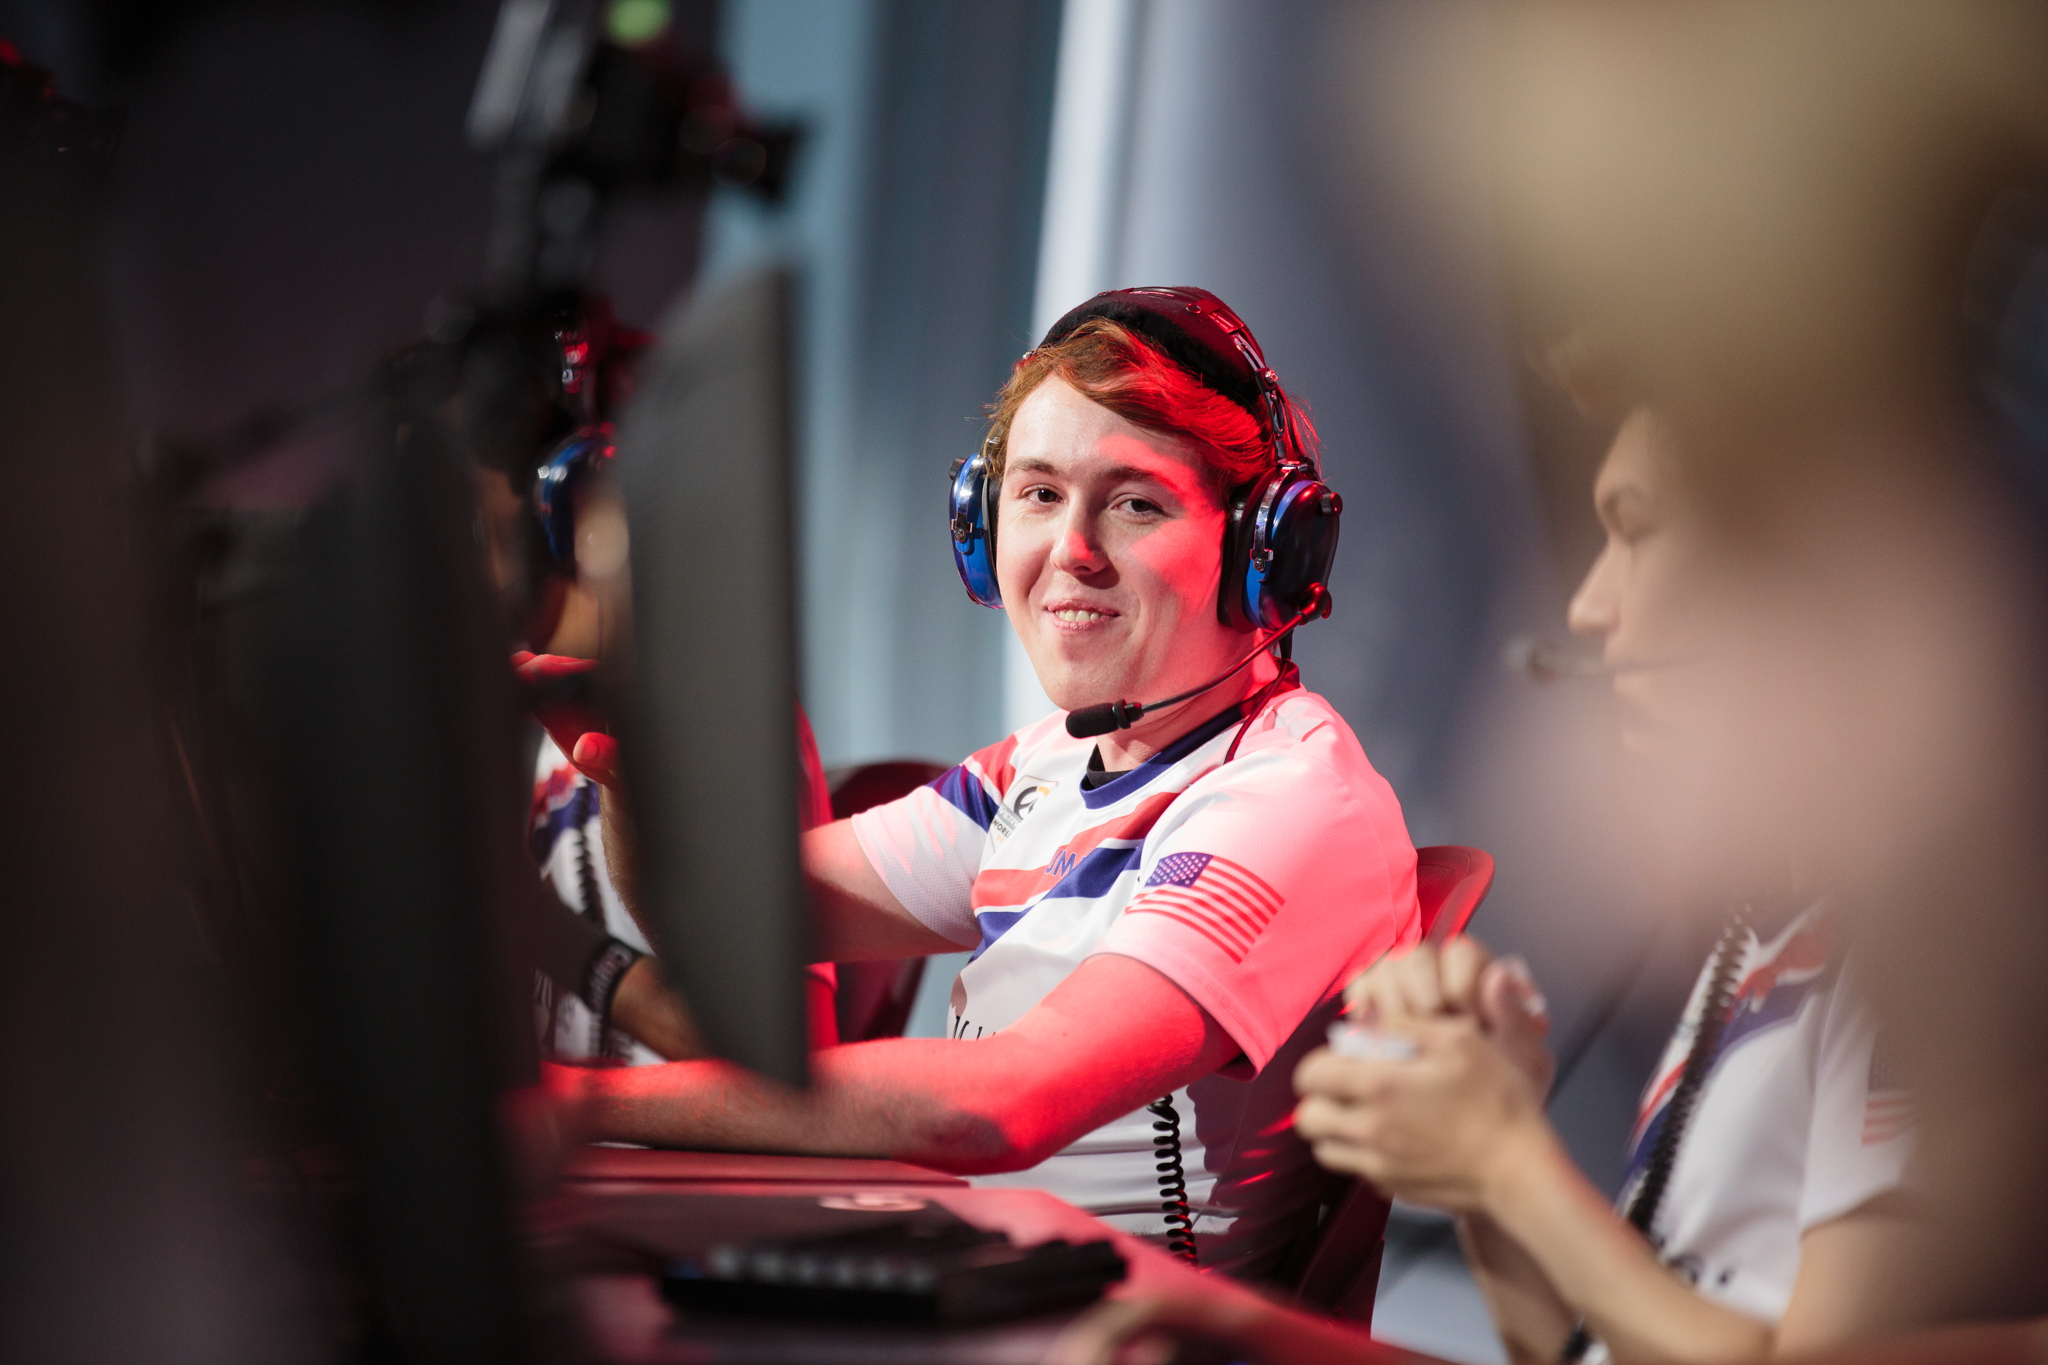 Muma, an Overwatch player, on-stage in the Overwatch League.